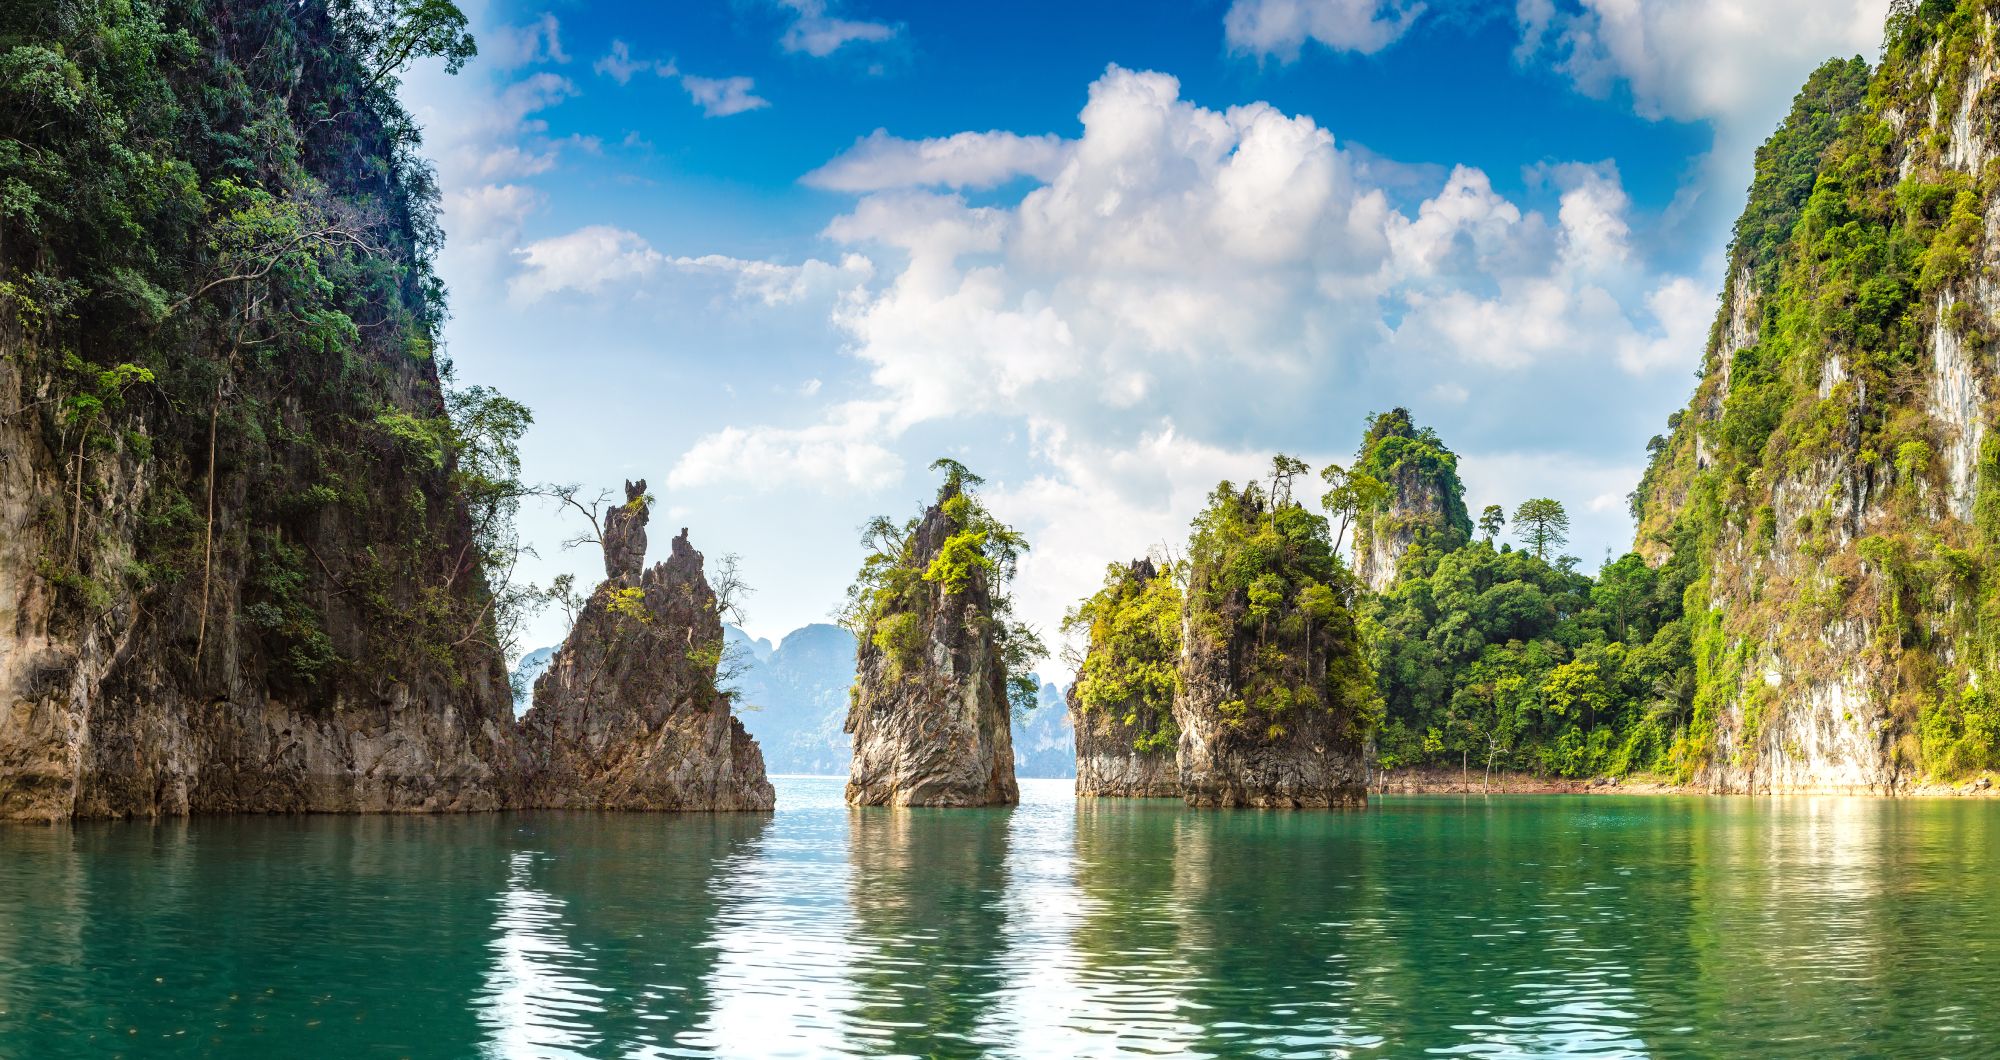 Related blog article Khao Sok: Thailand's Best National Park